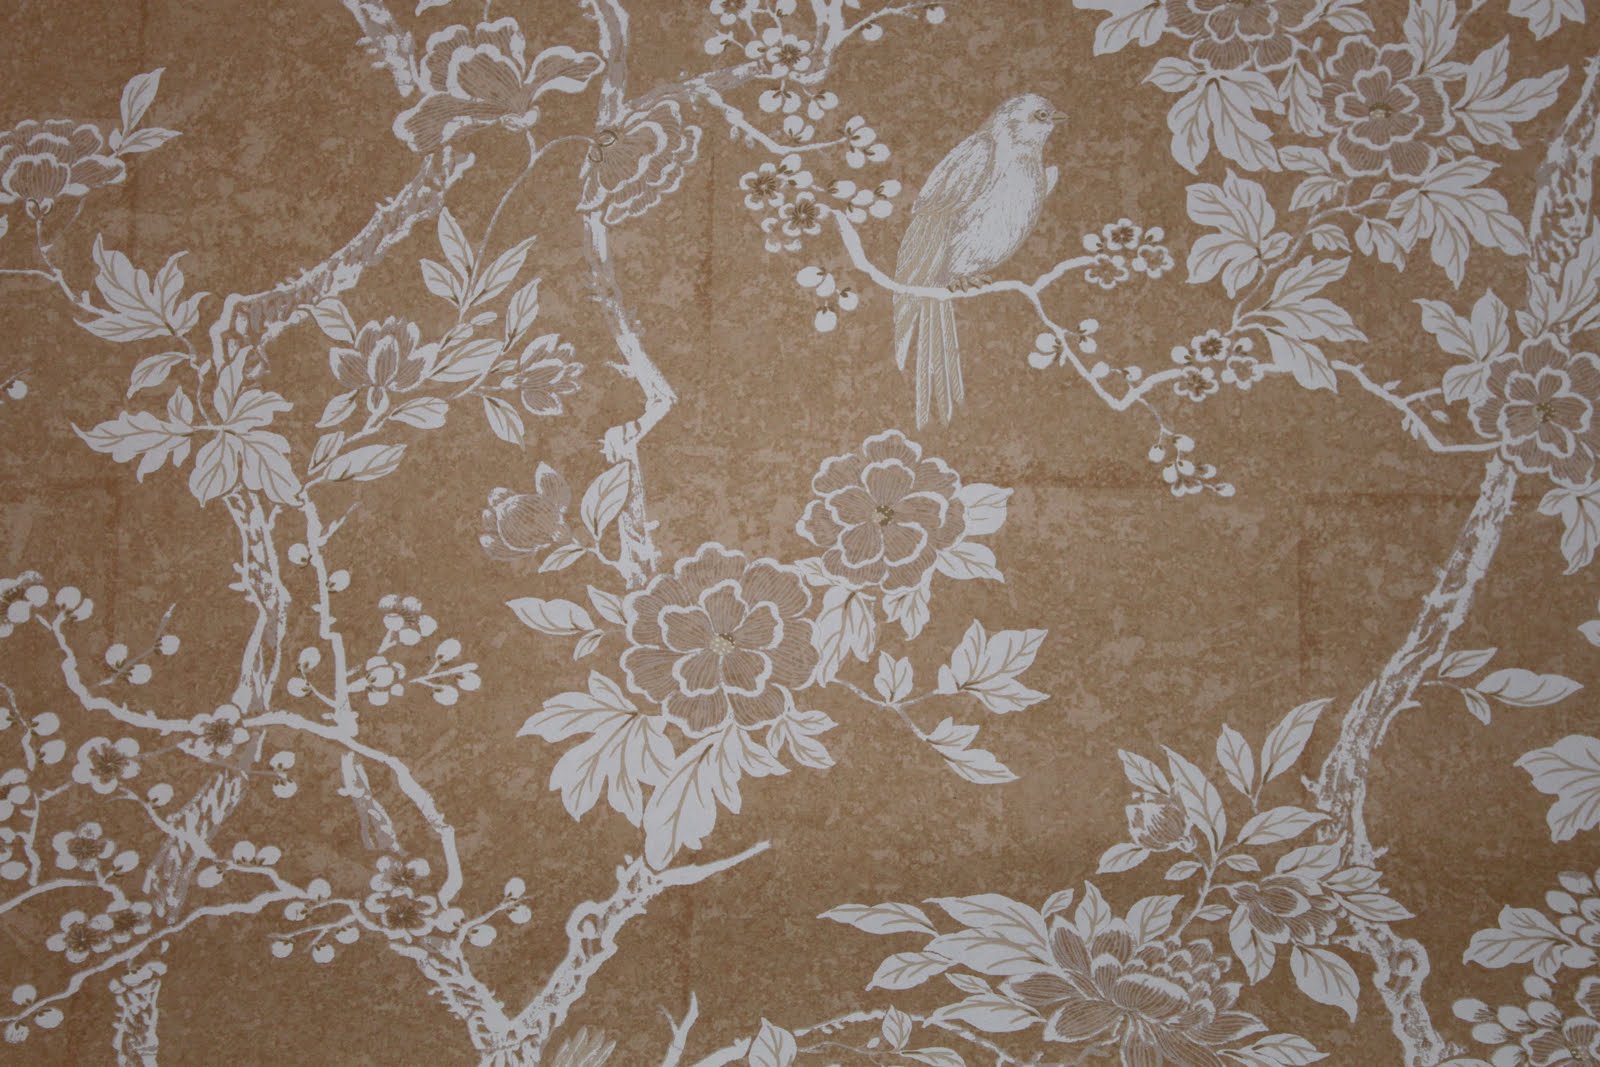 Discontinued Wallpaper By Laura Ashley 1600x1067